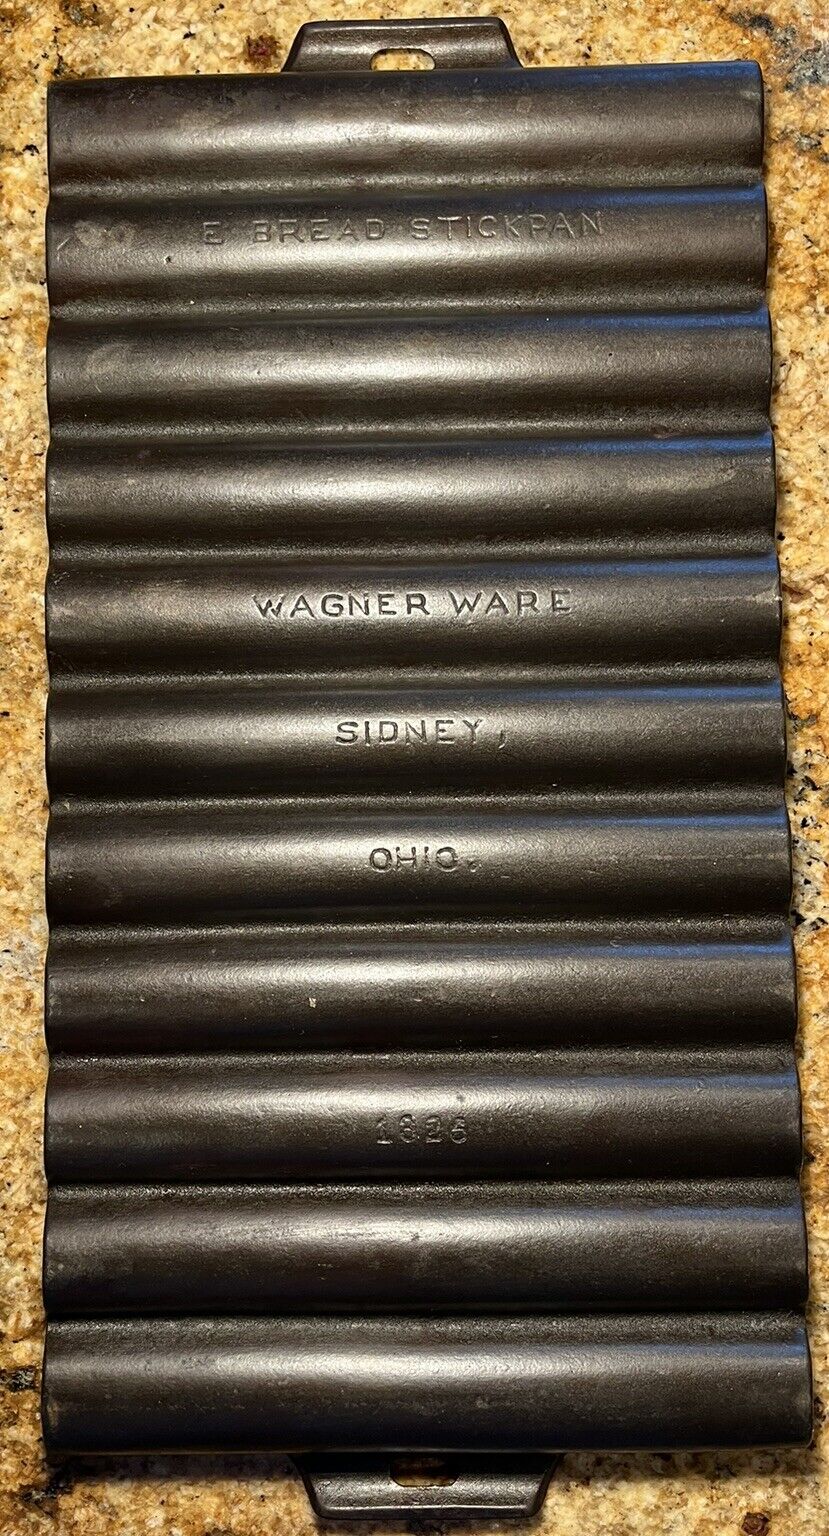 Vintage Wagner Ware Cast Iron E Bread Stick Pan Sidney Ohio CLEAN